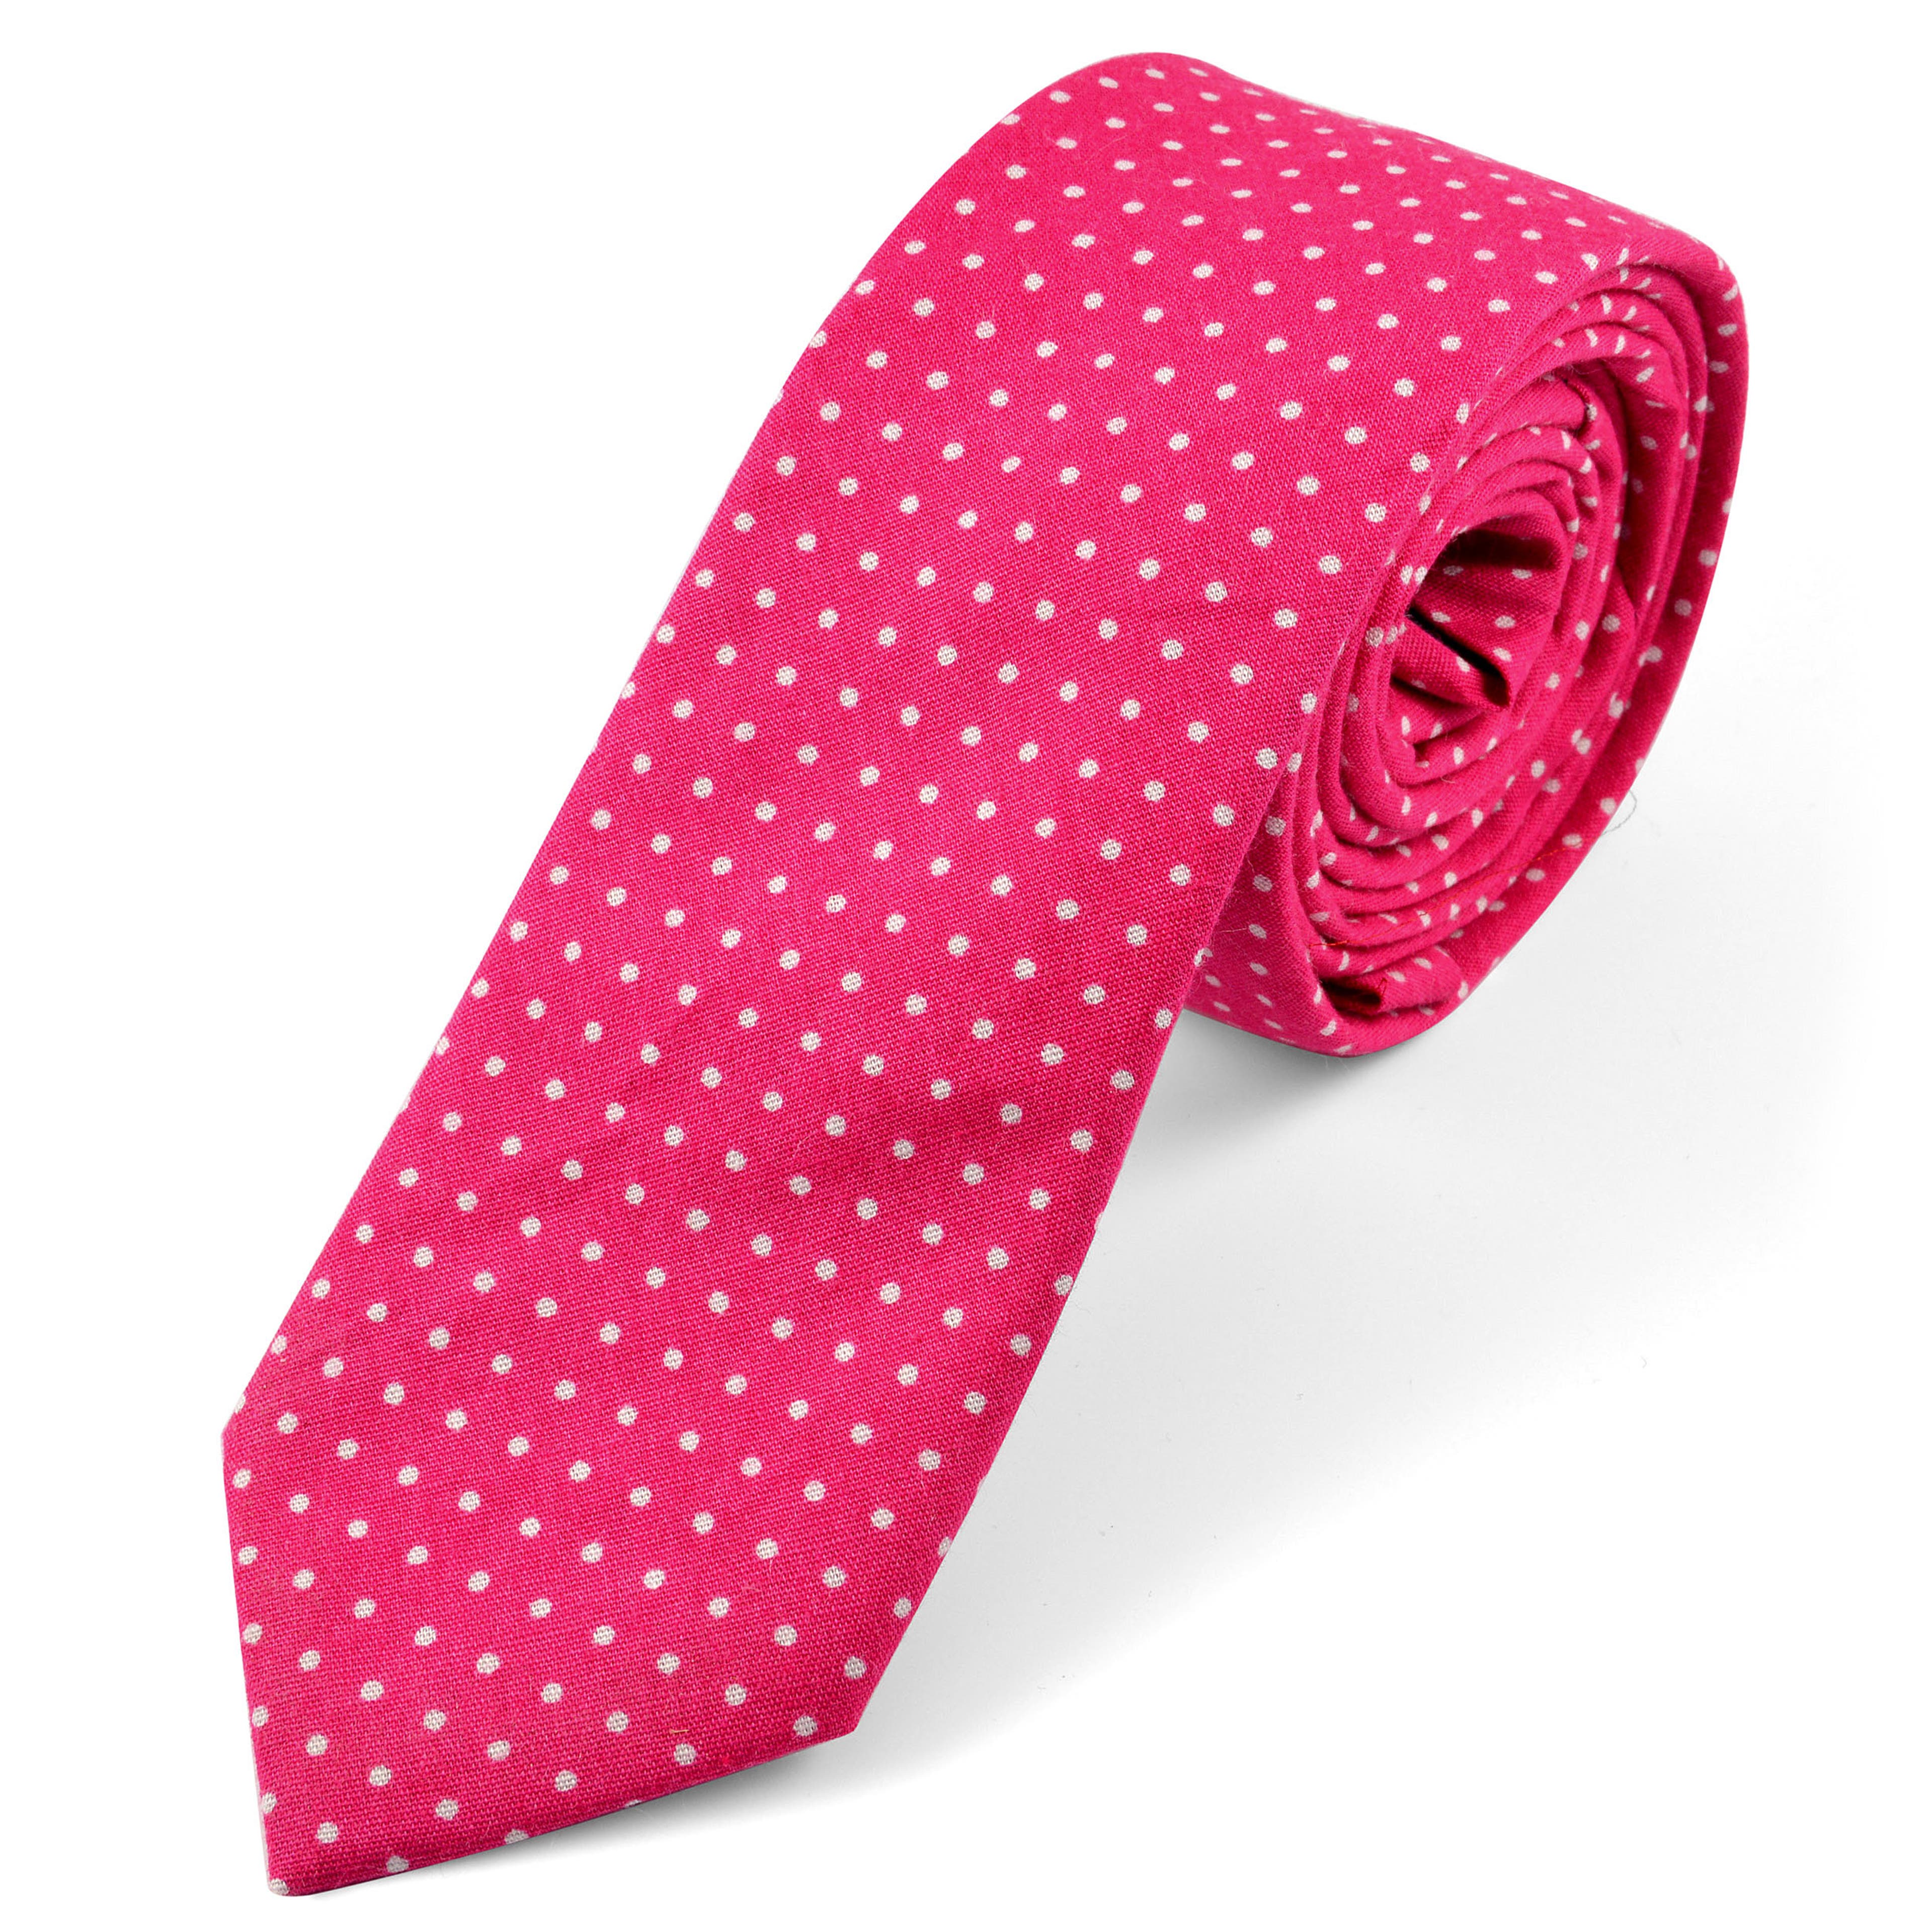 Neon Pink & White Dotted Cotton Tie